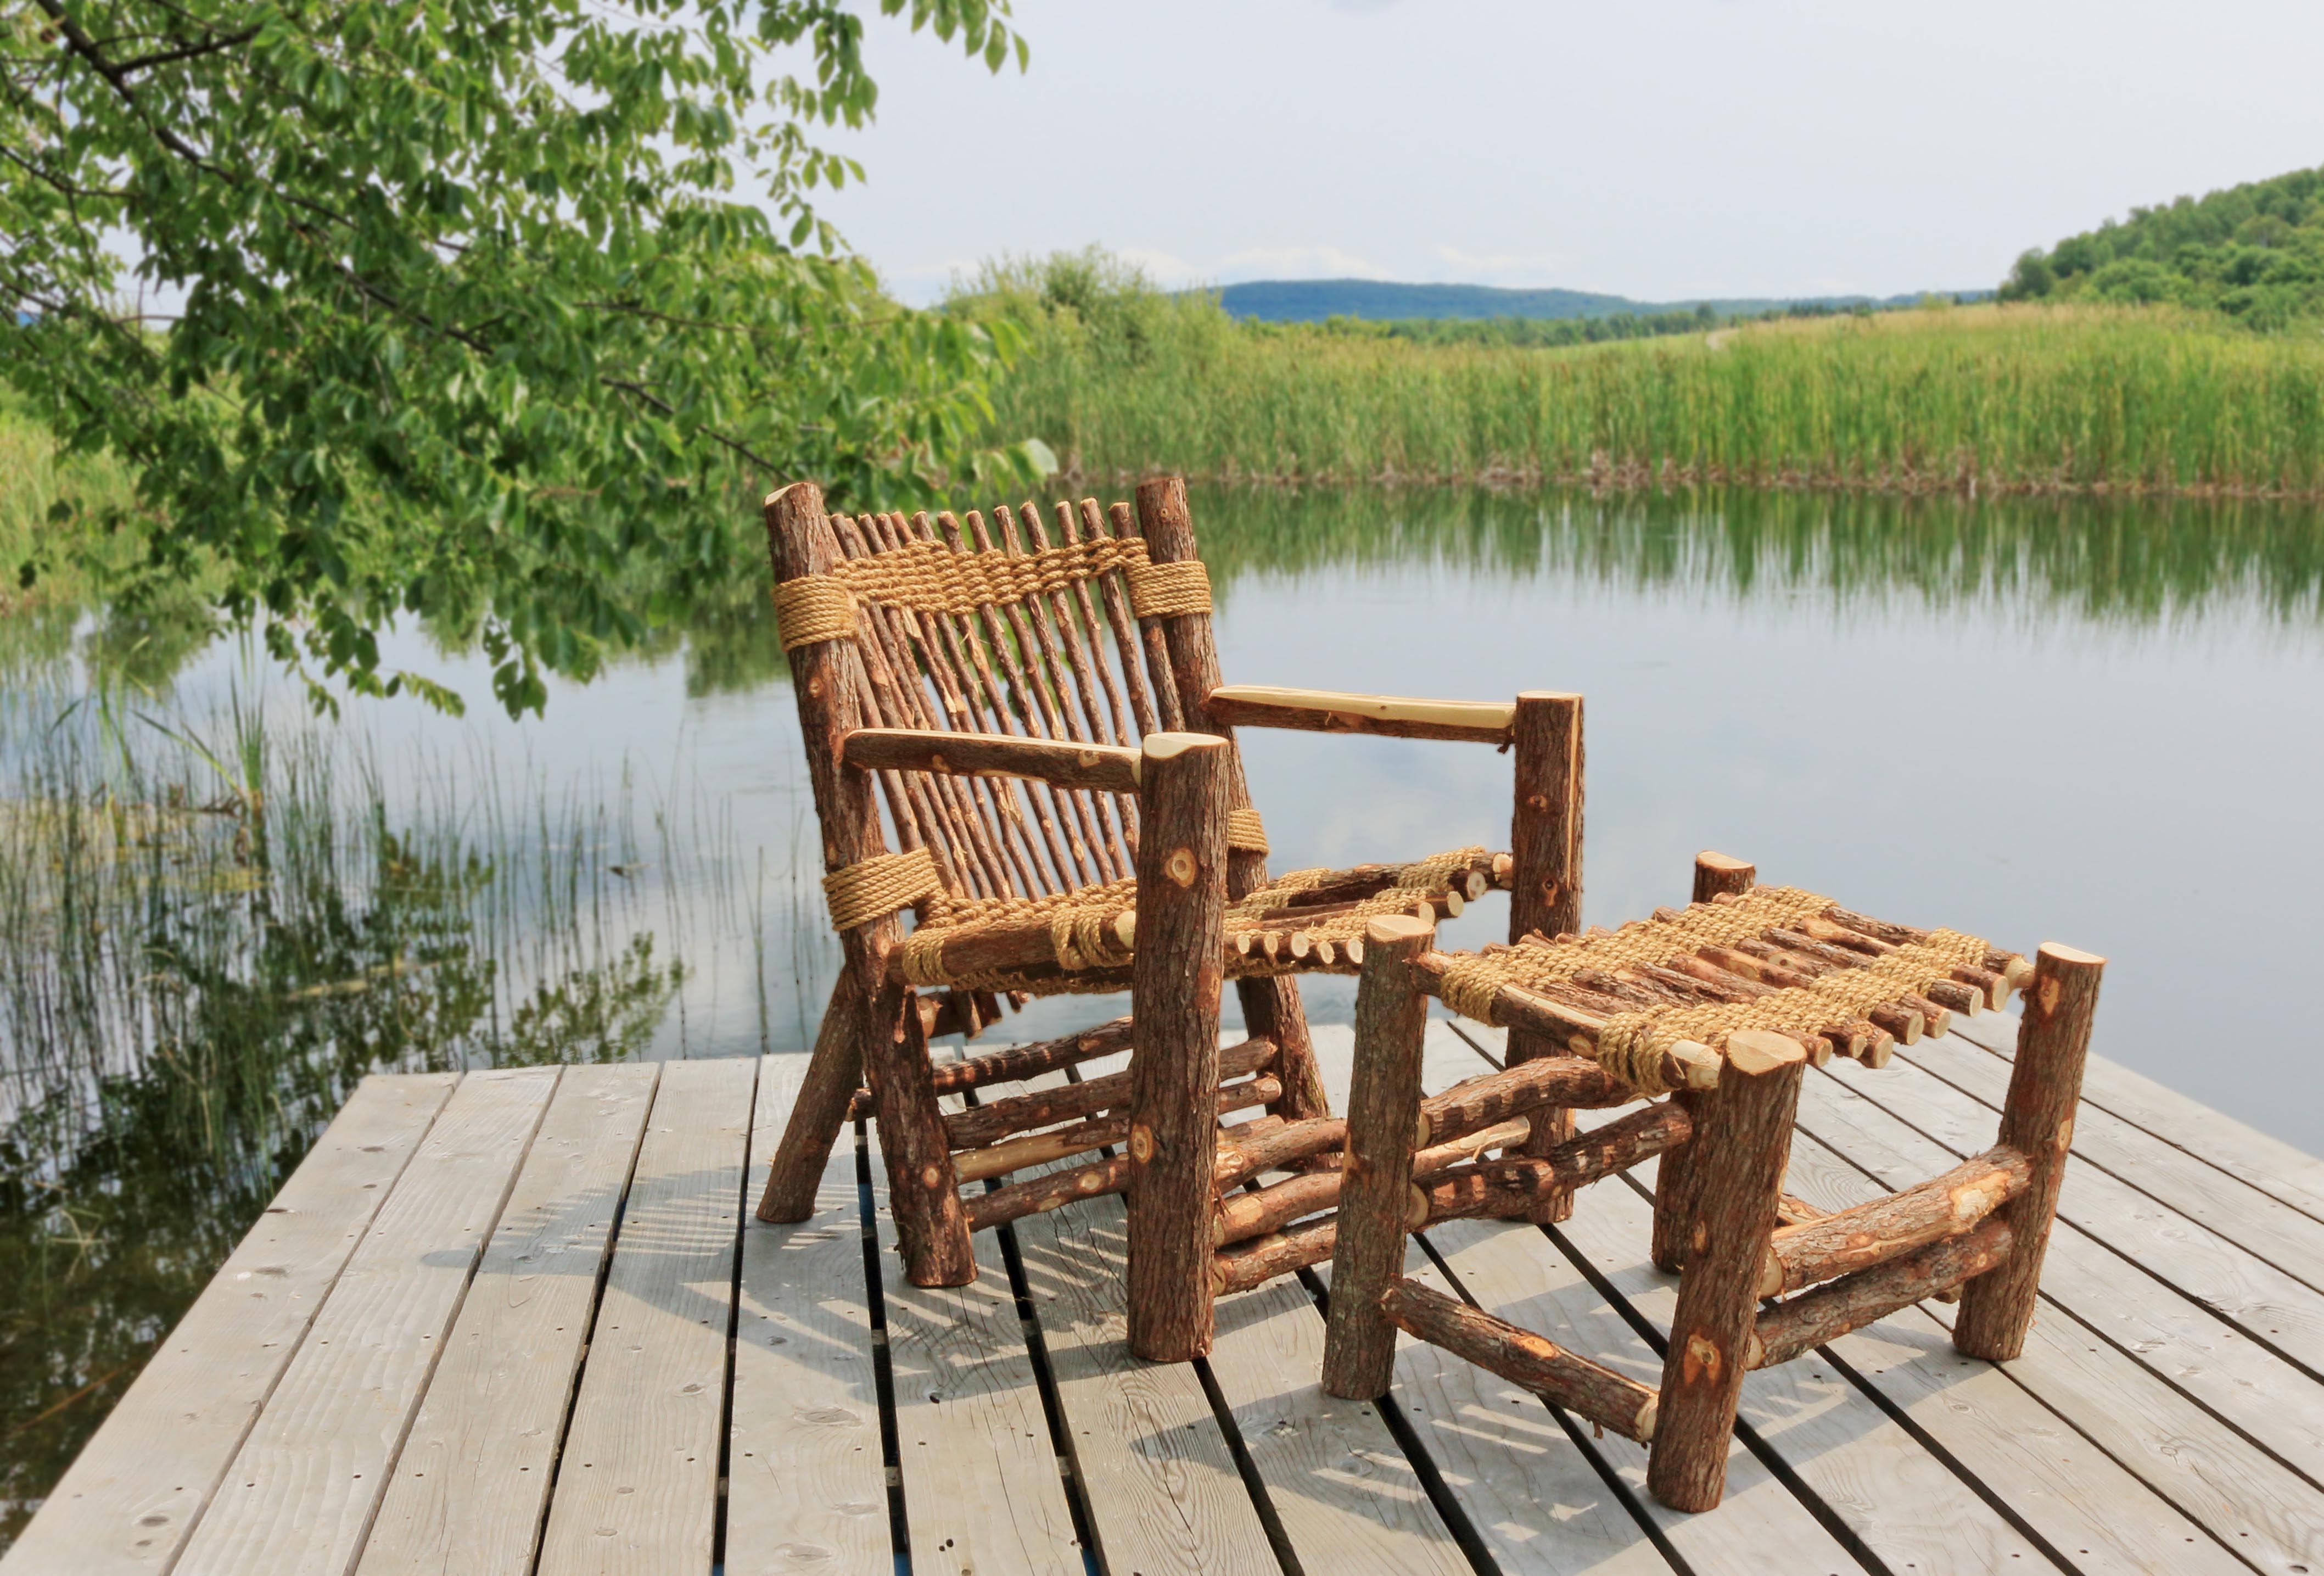 Vermont Cedar Chair Co. uses entire tree in outdoor furniture 